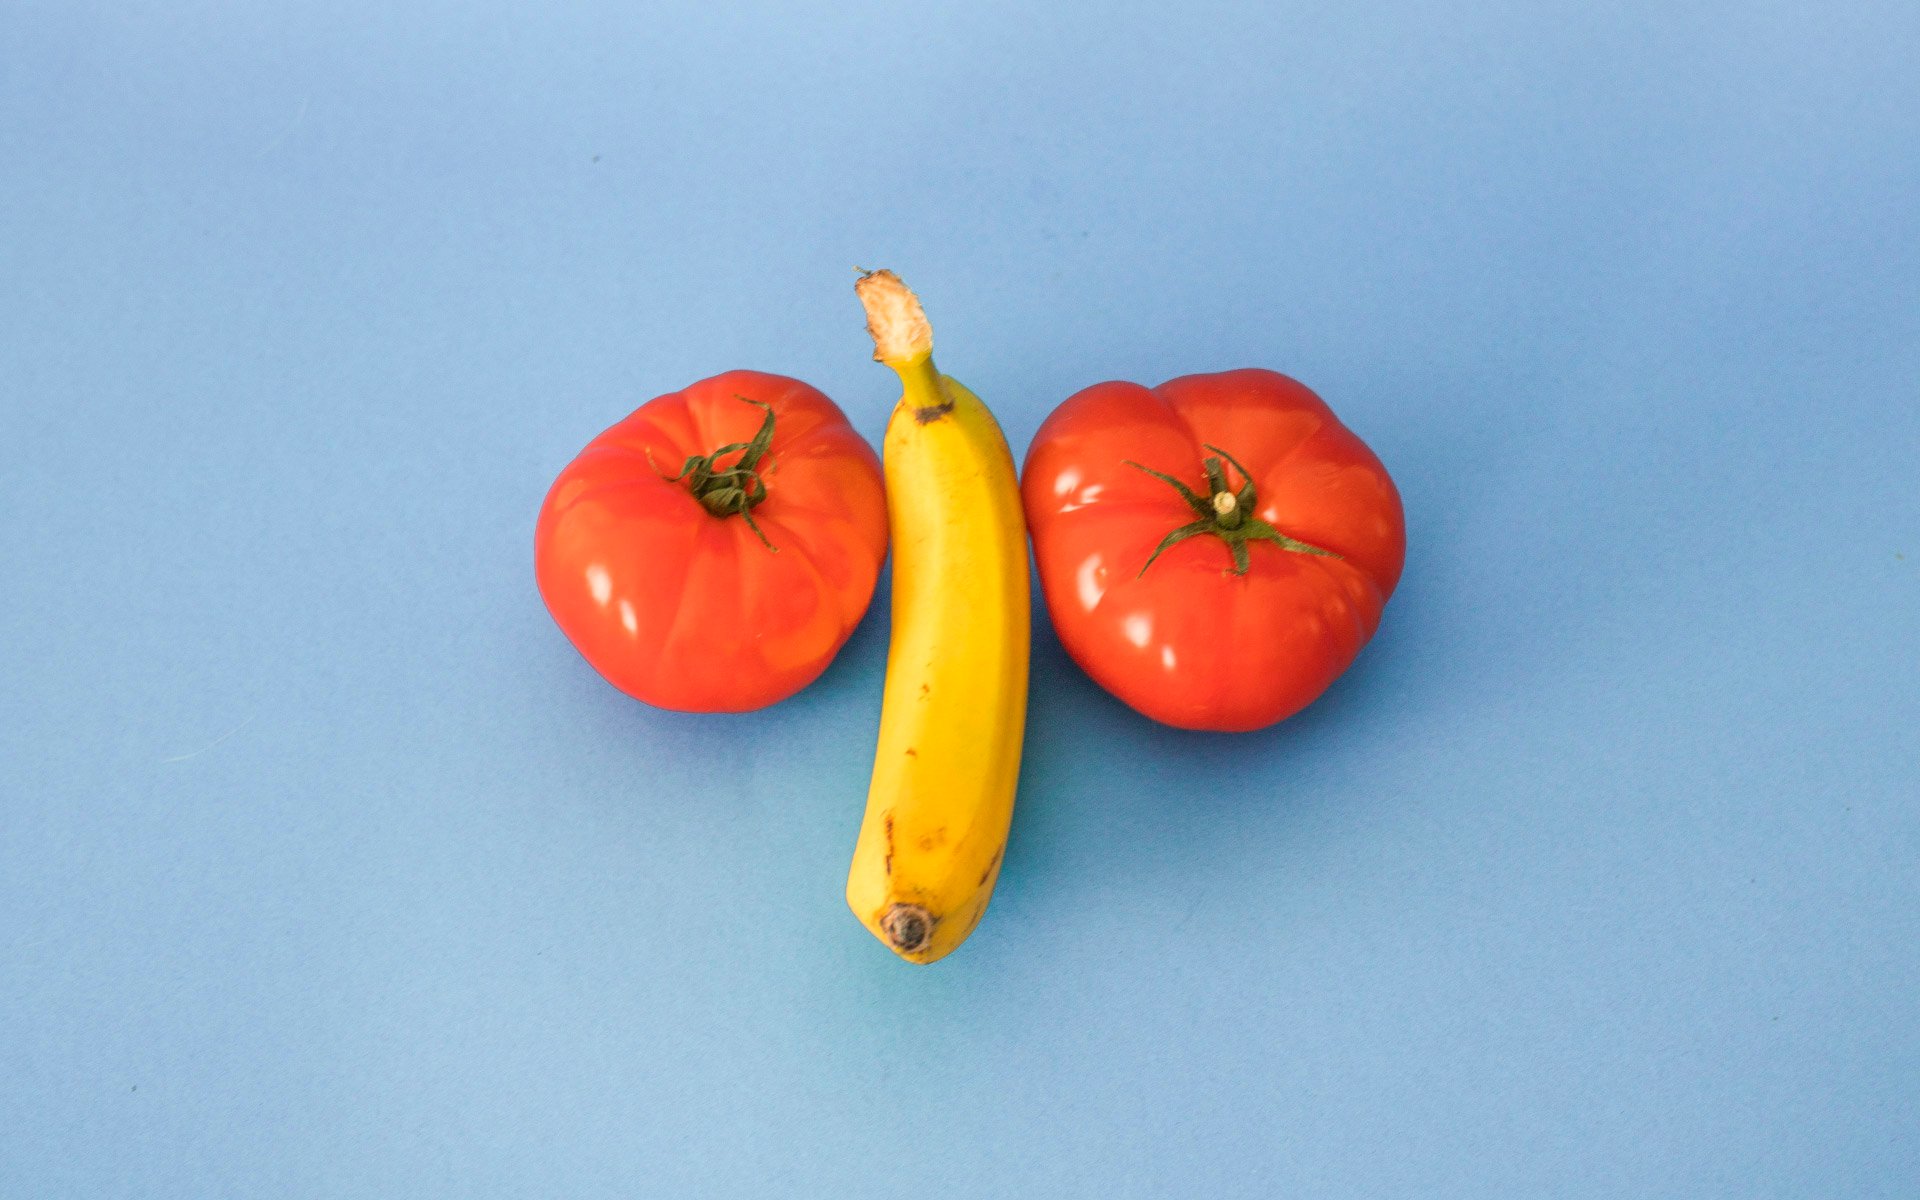 A yellow banana between two red tomatoes